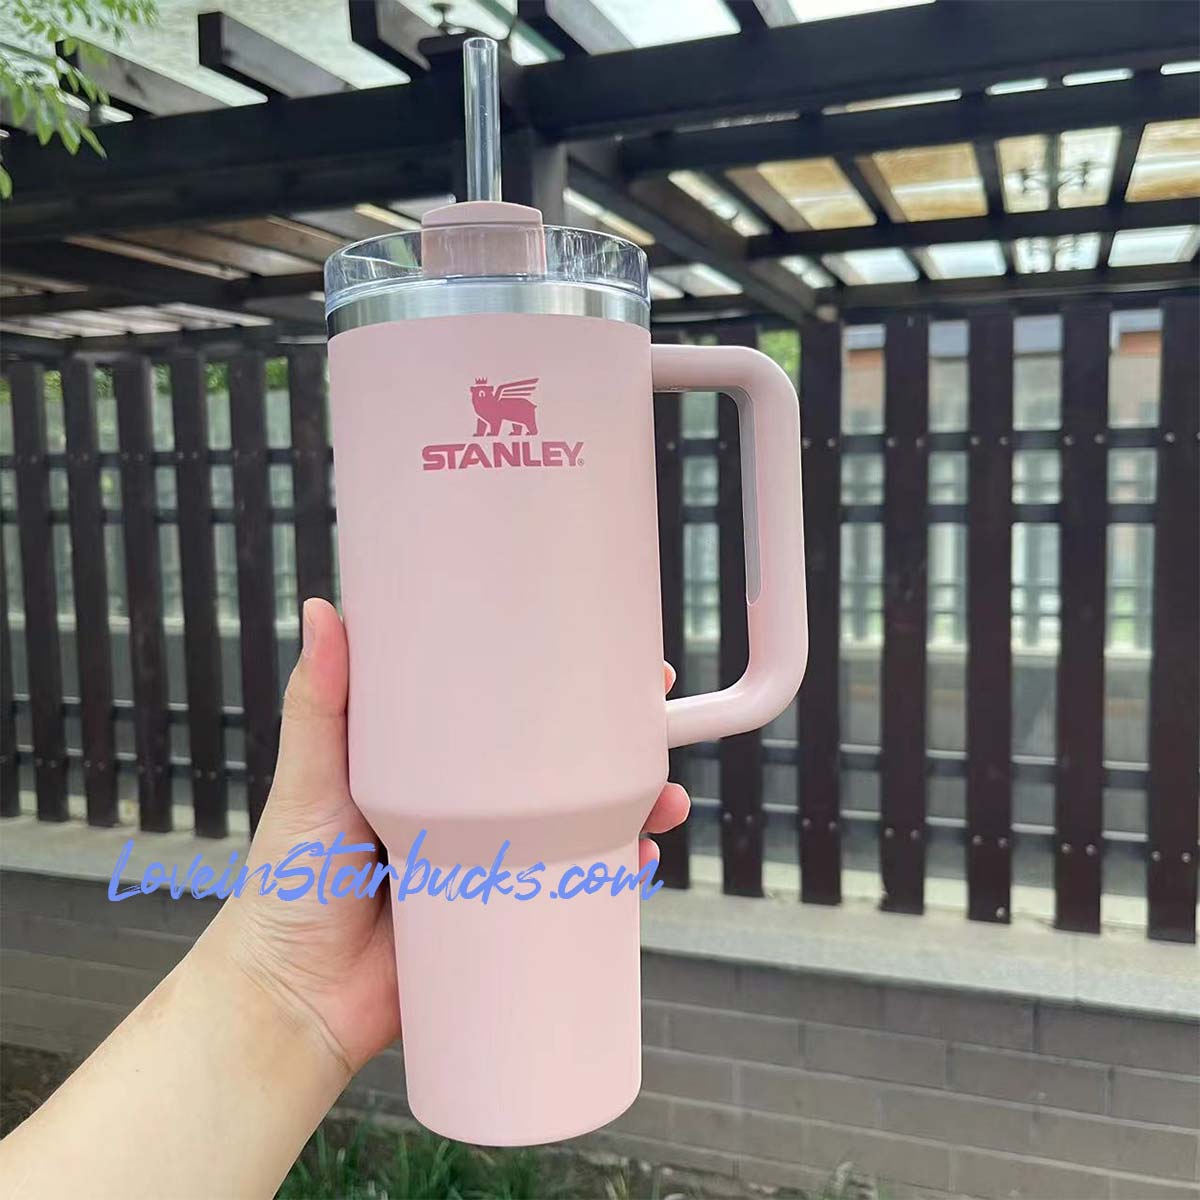 HOT on sale Stanley tumbler China dusk pink Stainless steel straw cup